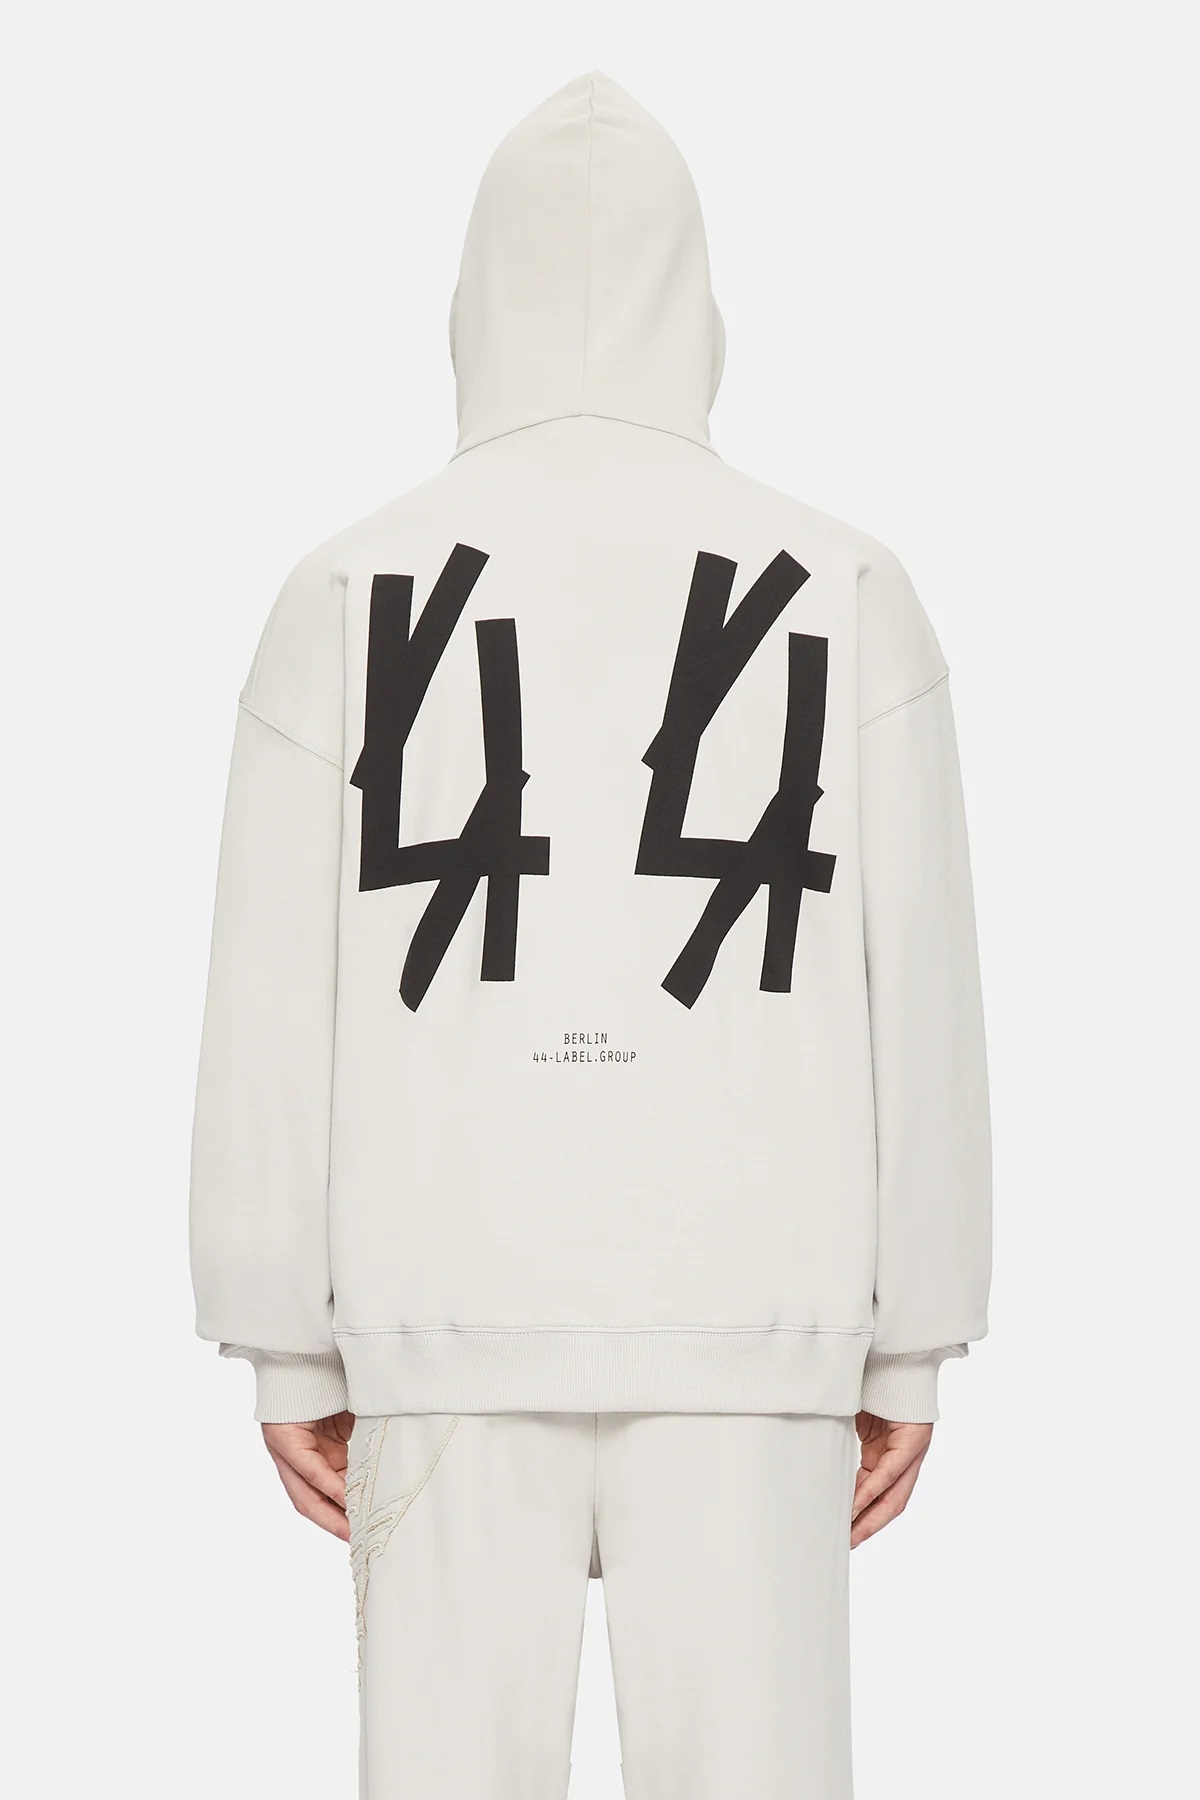 44 LABEL GROUP New Classic Hoodie in Dirty White/Black L